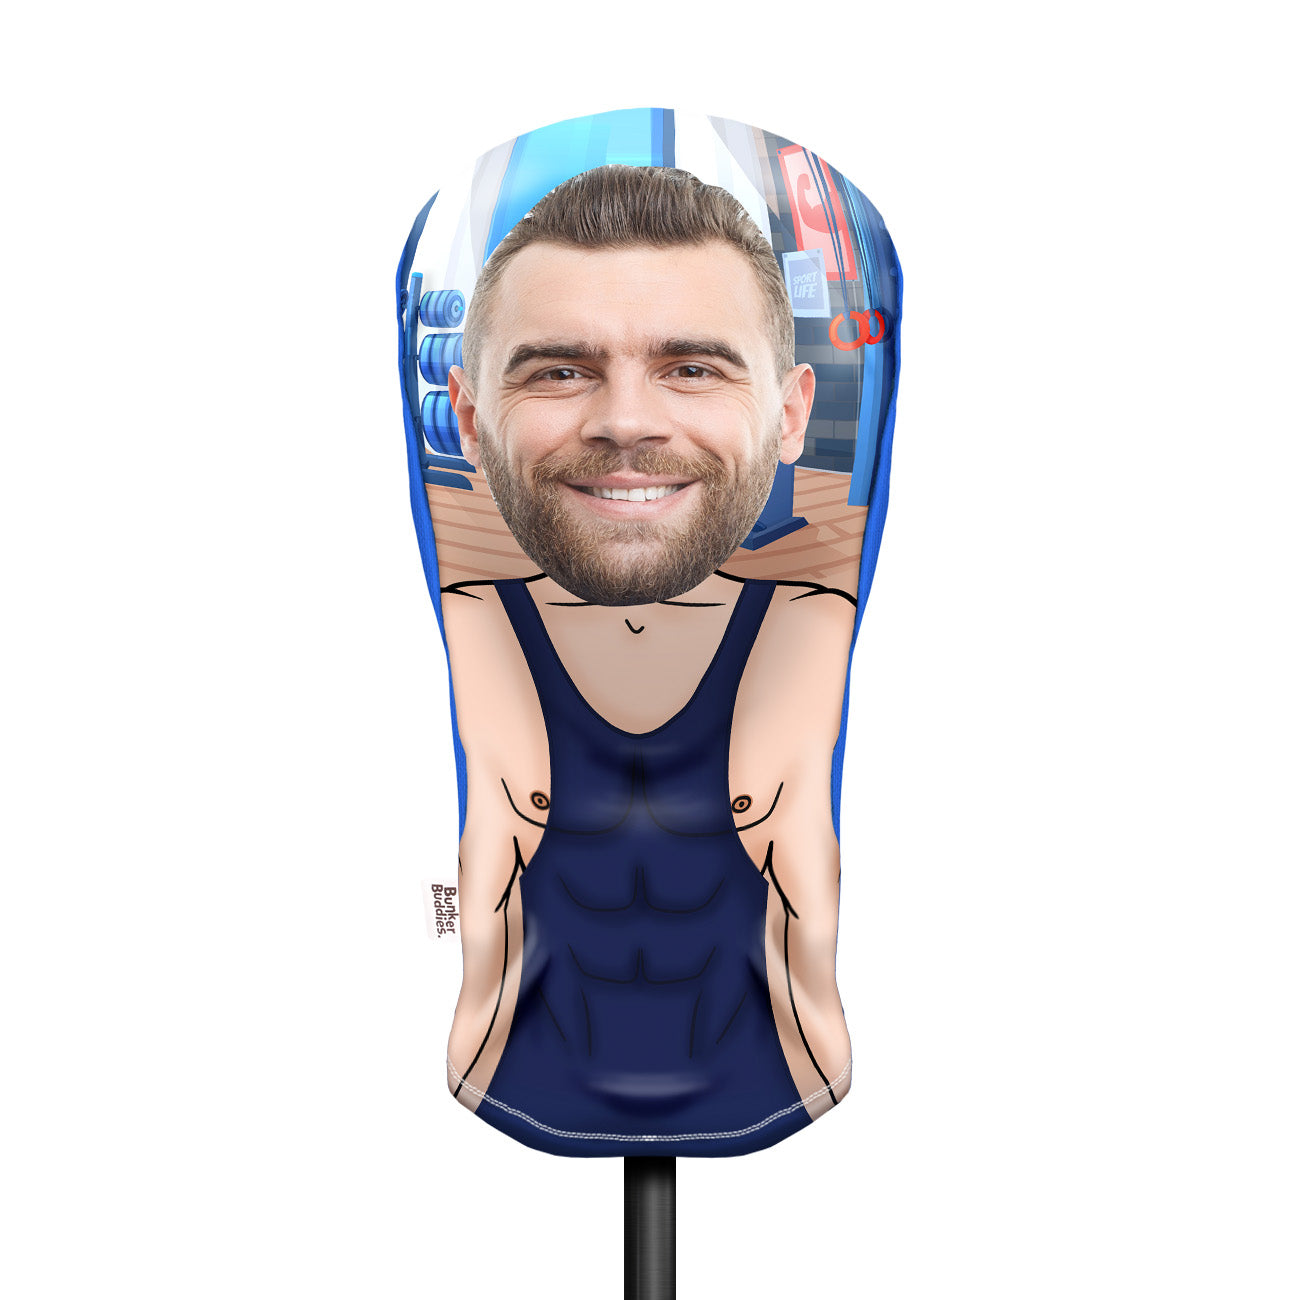 Gym Hunk Personalised Golf Head Cover